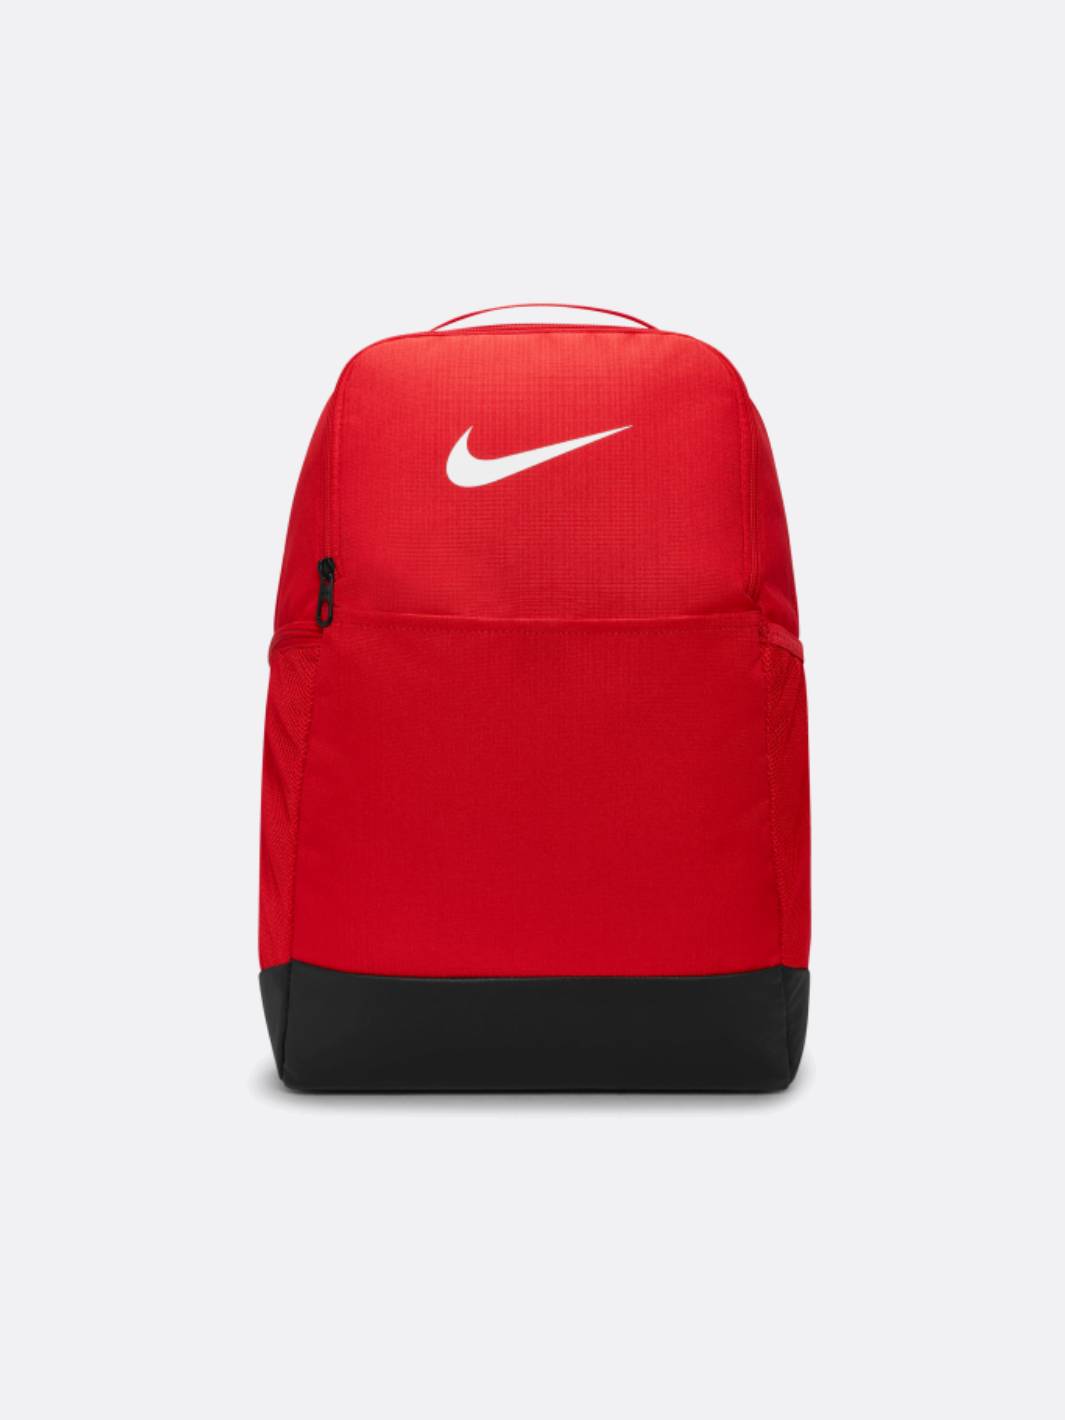 Nike - Accessories Brasilia 9.5 Backpack - University Red/White - Nohble